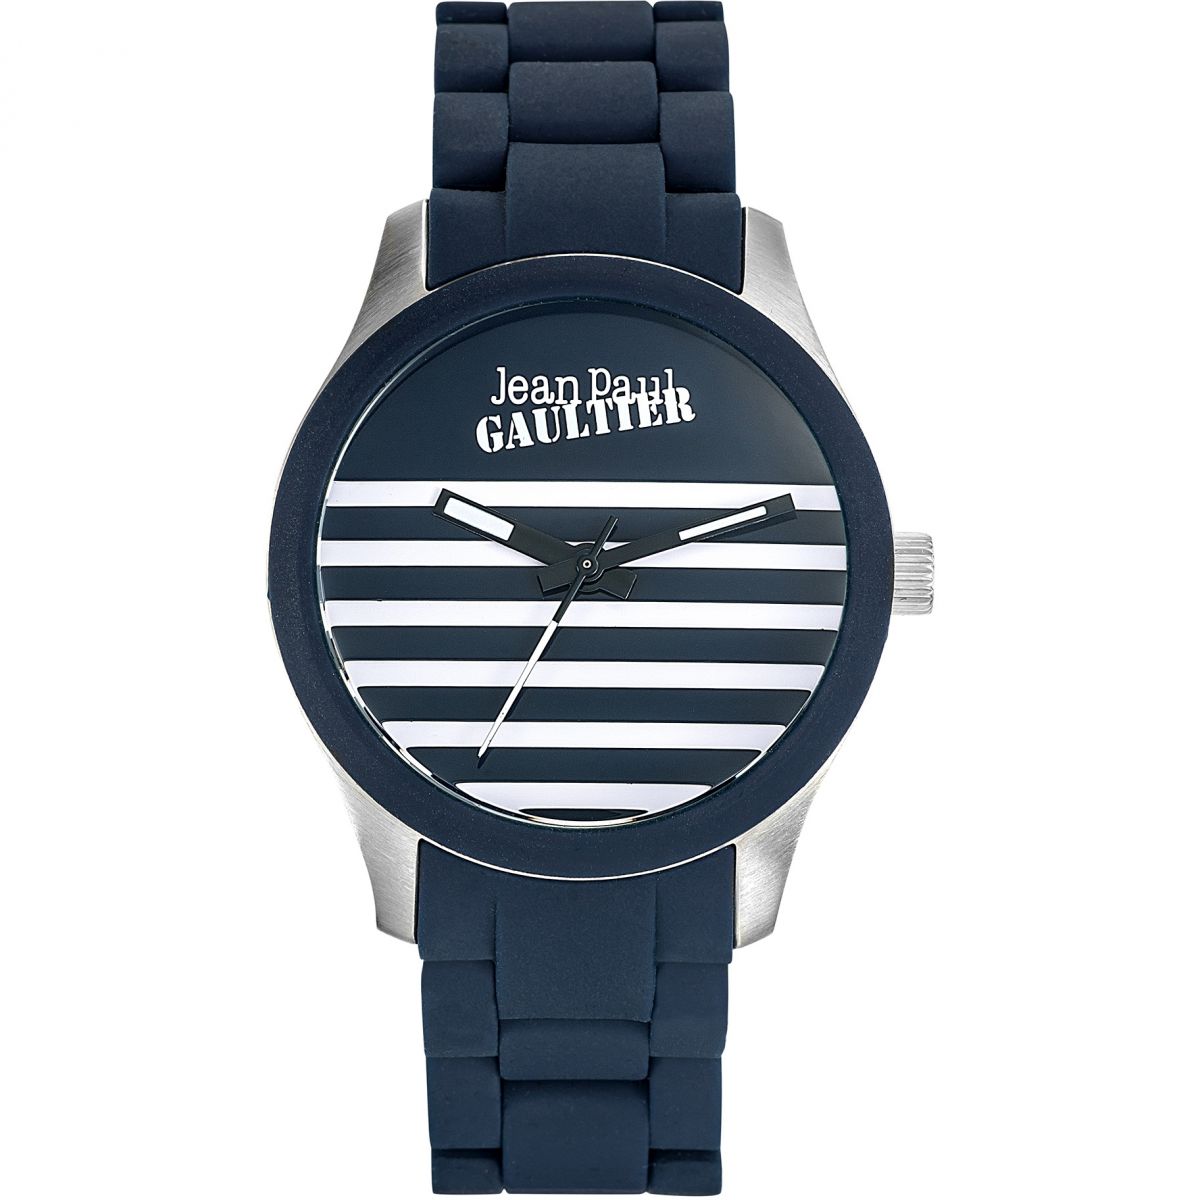 Jean-Paul-Gaultier-Watches-Man-For-Himself-2